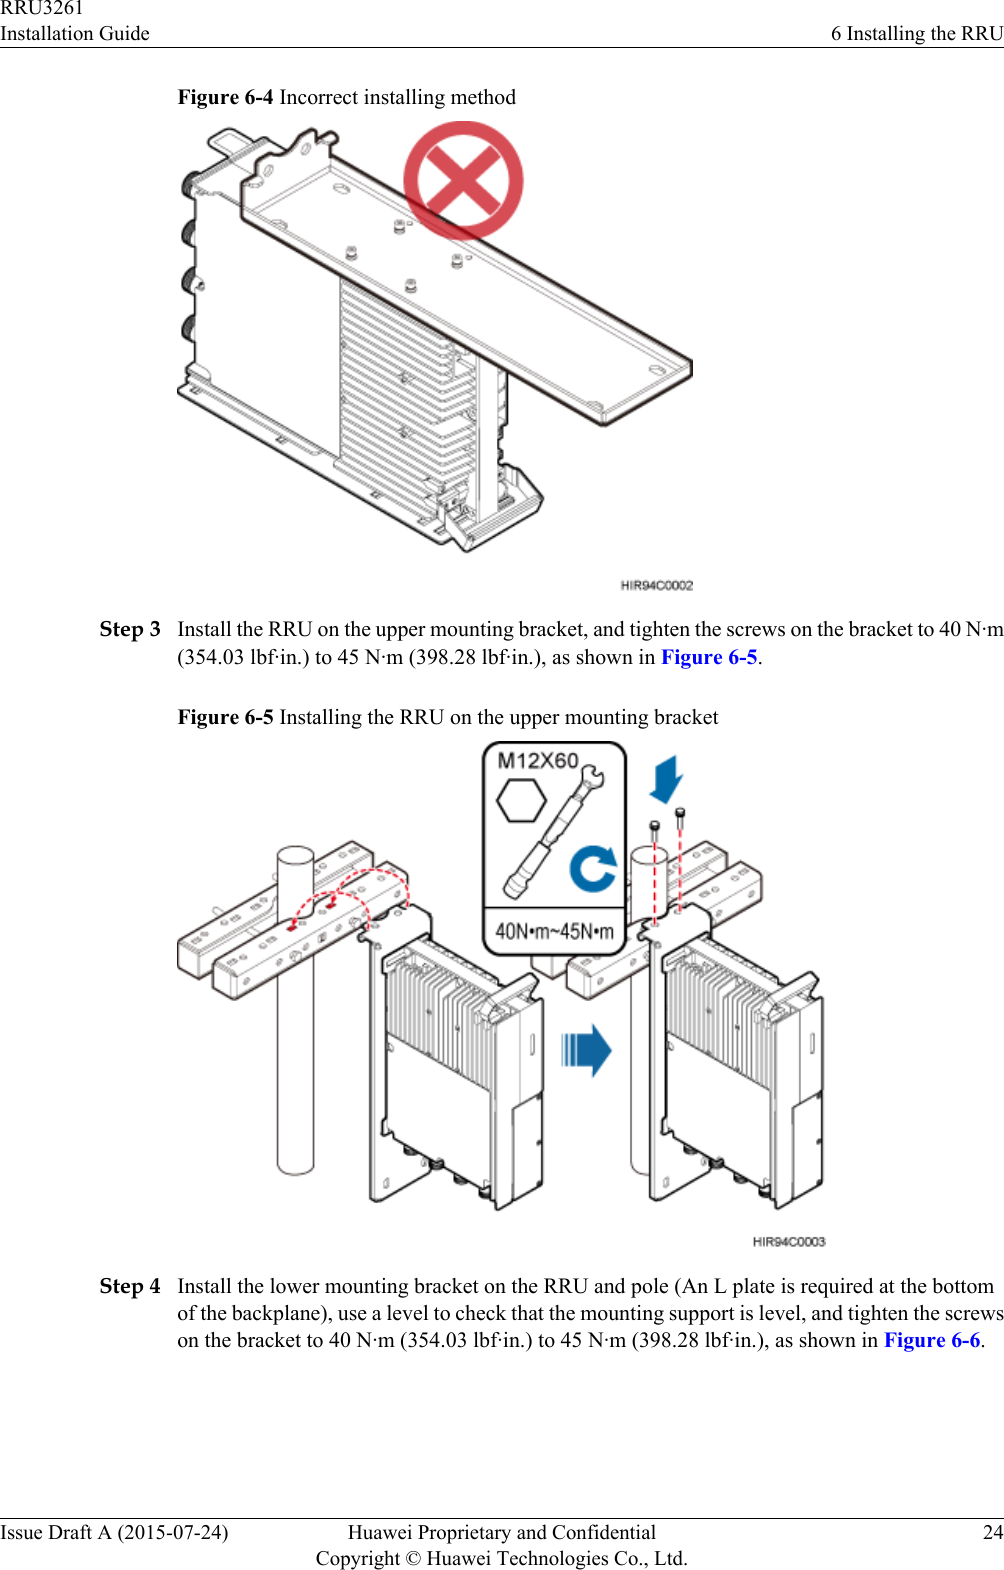 Figure 6-4 Incorrect installing methodStep 3 Install the RRU on the upper mounting bracket, and tighten the screws on the bracket to 40 N·m(354.03 lbf·in.) to 45 N·m (398.28 lbf·in.), as shown in Figure 6-5.Figure 6-5 Installing the RRU on the upper mounting bracketStep 4 Install the lower mounting bracket on the RRU and pole (An L plate is required at the bottomof the backplane), use a level to check that the mounting support is level, and tighten the screwson the bracket to 40 N·m (354.03 lbf·in.) to 45 N·m (398.28 lbf·in.), as shown in Figure 6-6.RRU3261Installation Guide 6 Installing the RRUIssue Draft A (2015-07-24) Huawei Proprietary and ConfidentialCopyright © Huawei Technologies Co., Ltd.24